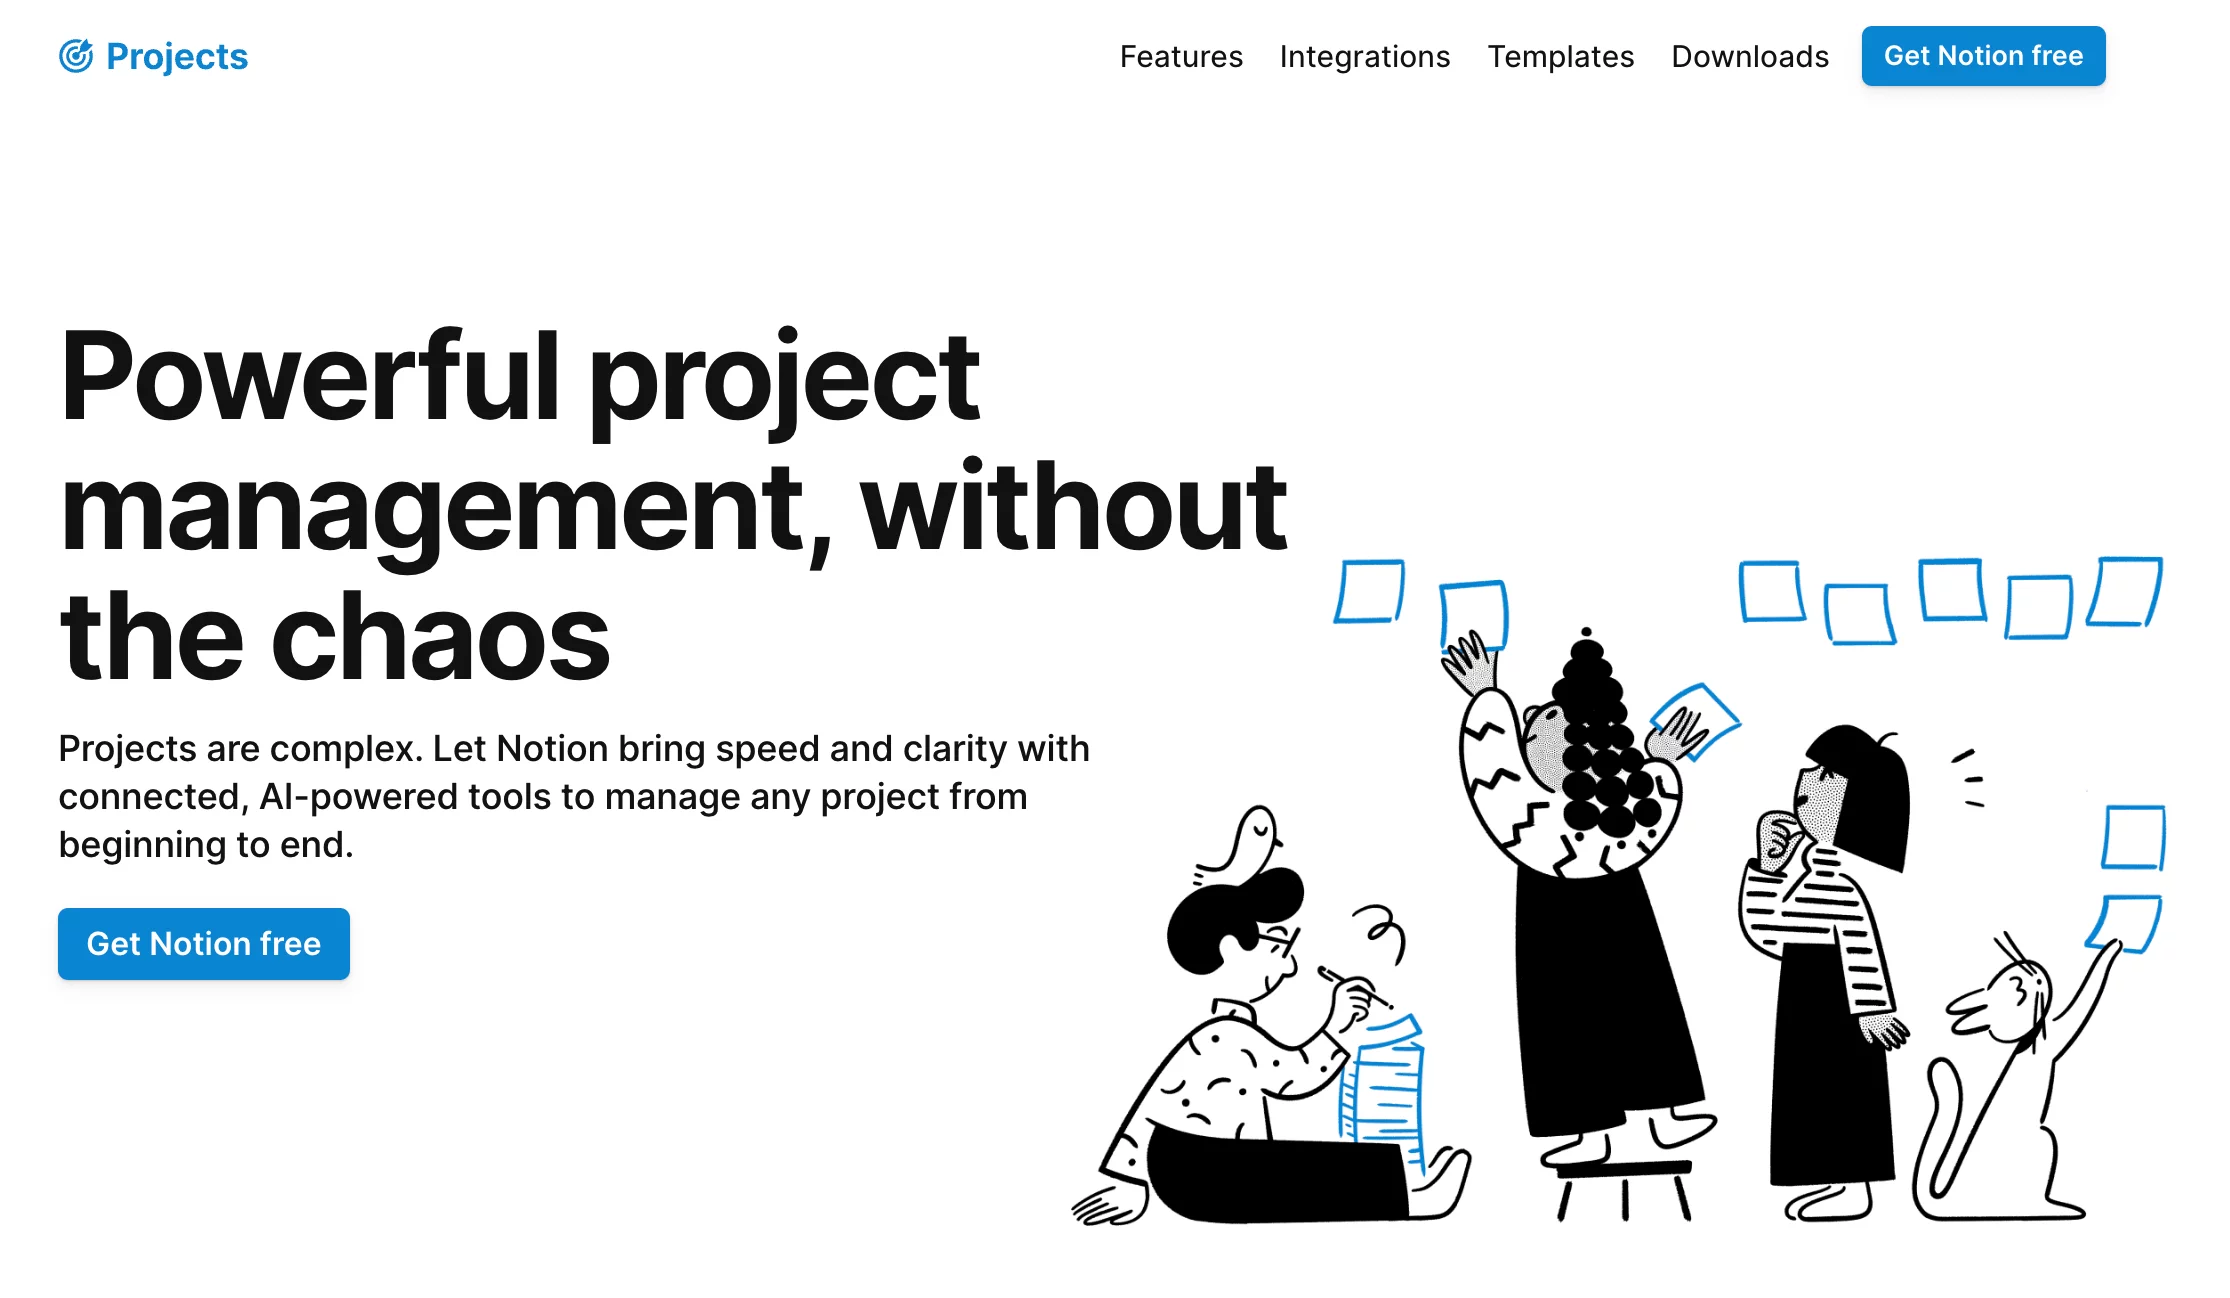 Notion website screenshots showing its projects feature as useful for powerful project management, without the chaos.